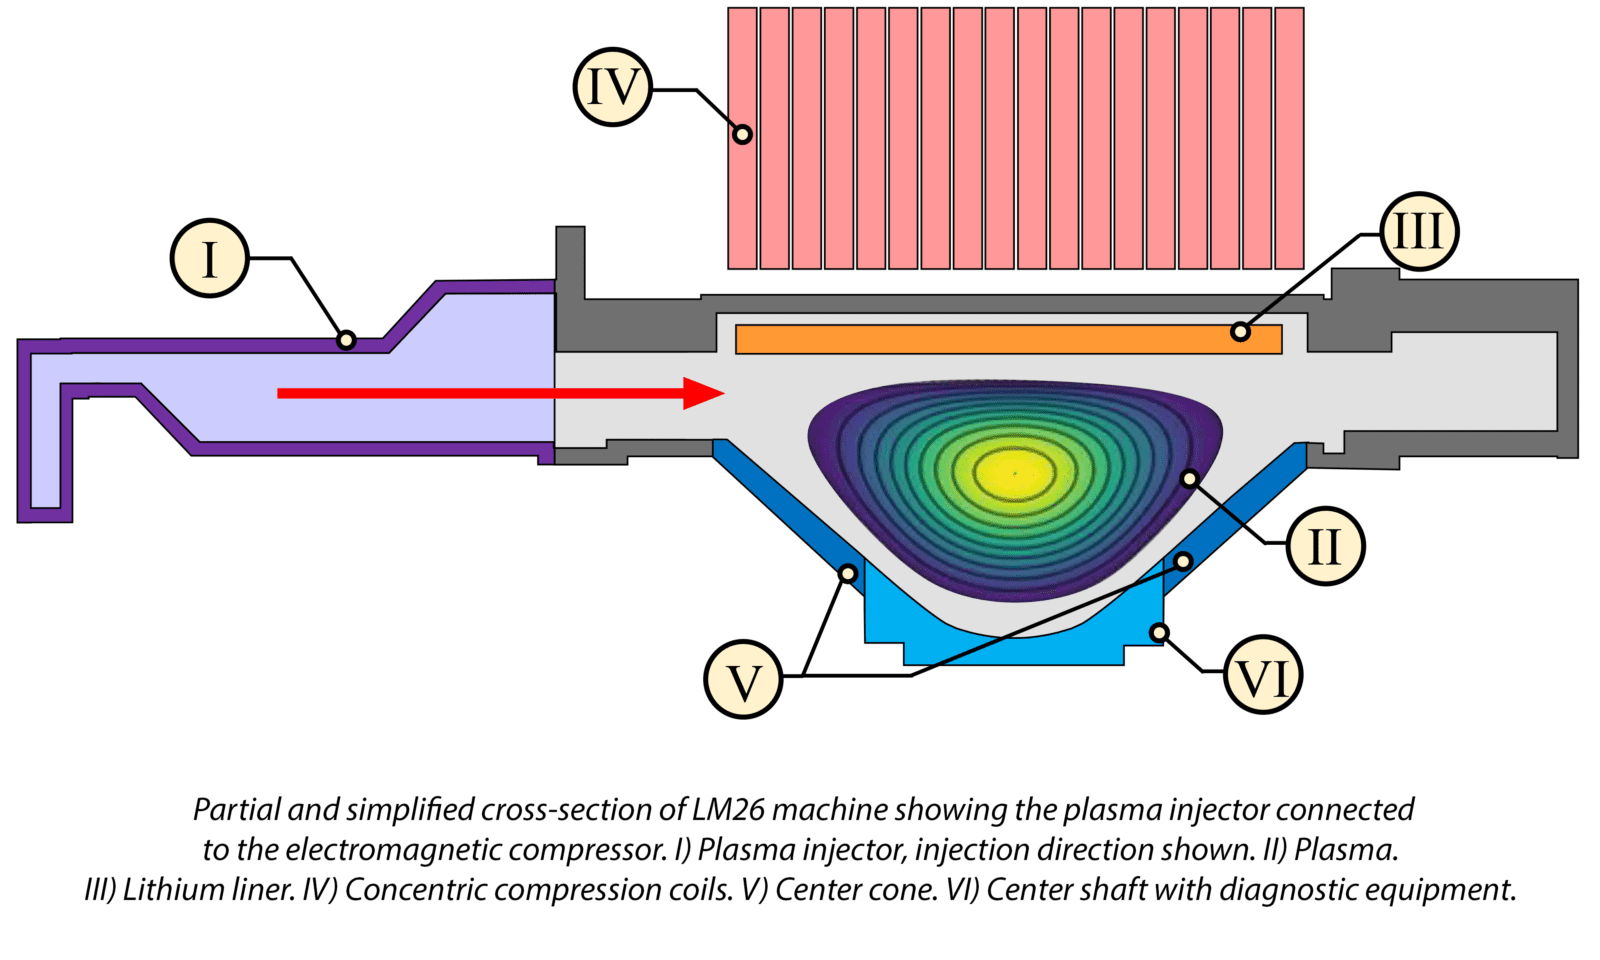 Electromagnetic Lithium Ring Compression for Magnetized Target Fusion Application: Trajectories